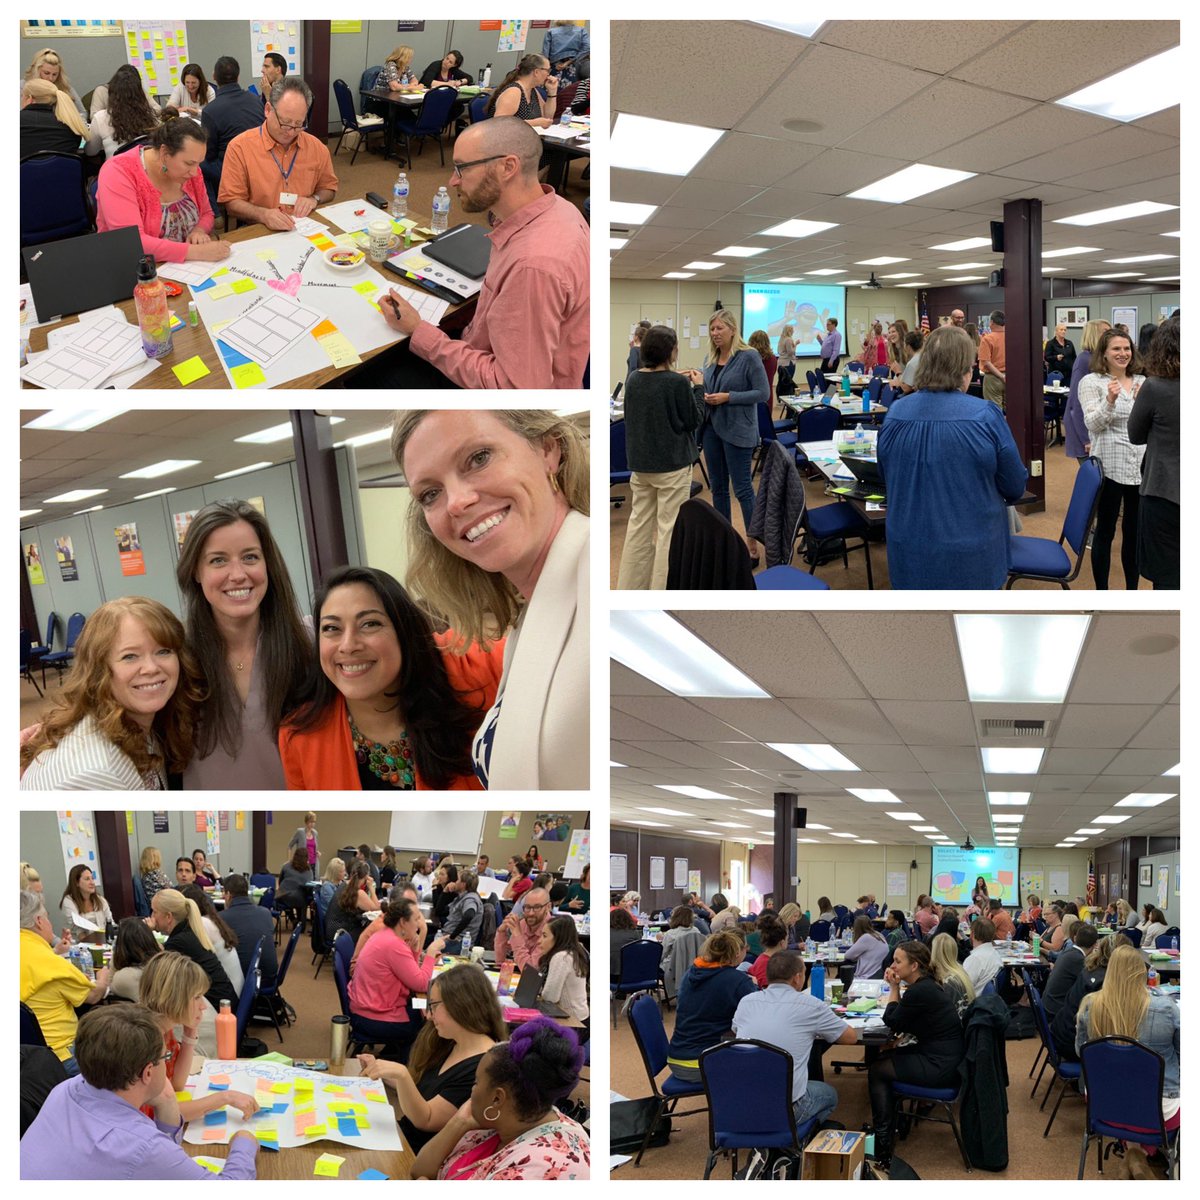 Awesome collaboration today with @mpusd_now and @charitypbl! Teachers and administrators doing AMAZING work to support childhood adversity, trauma, and healing. #deeperlearning #wholechildeducation